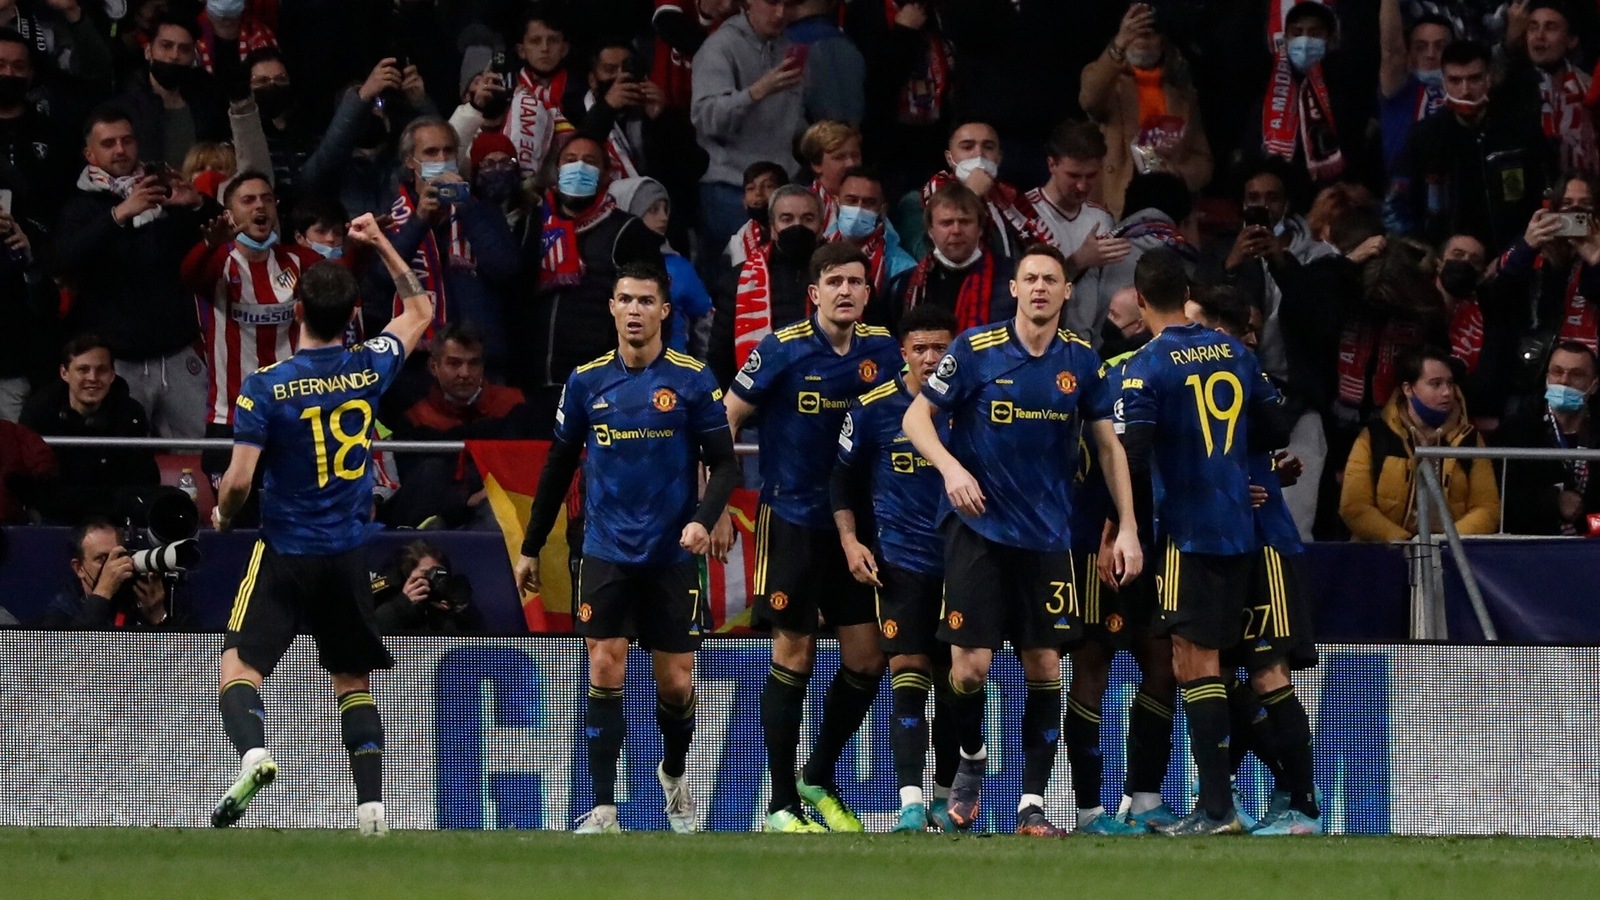 Man United scored late to preserve a 1-1 draw with Atletico Madrid in the Champions League.